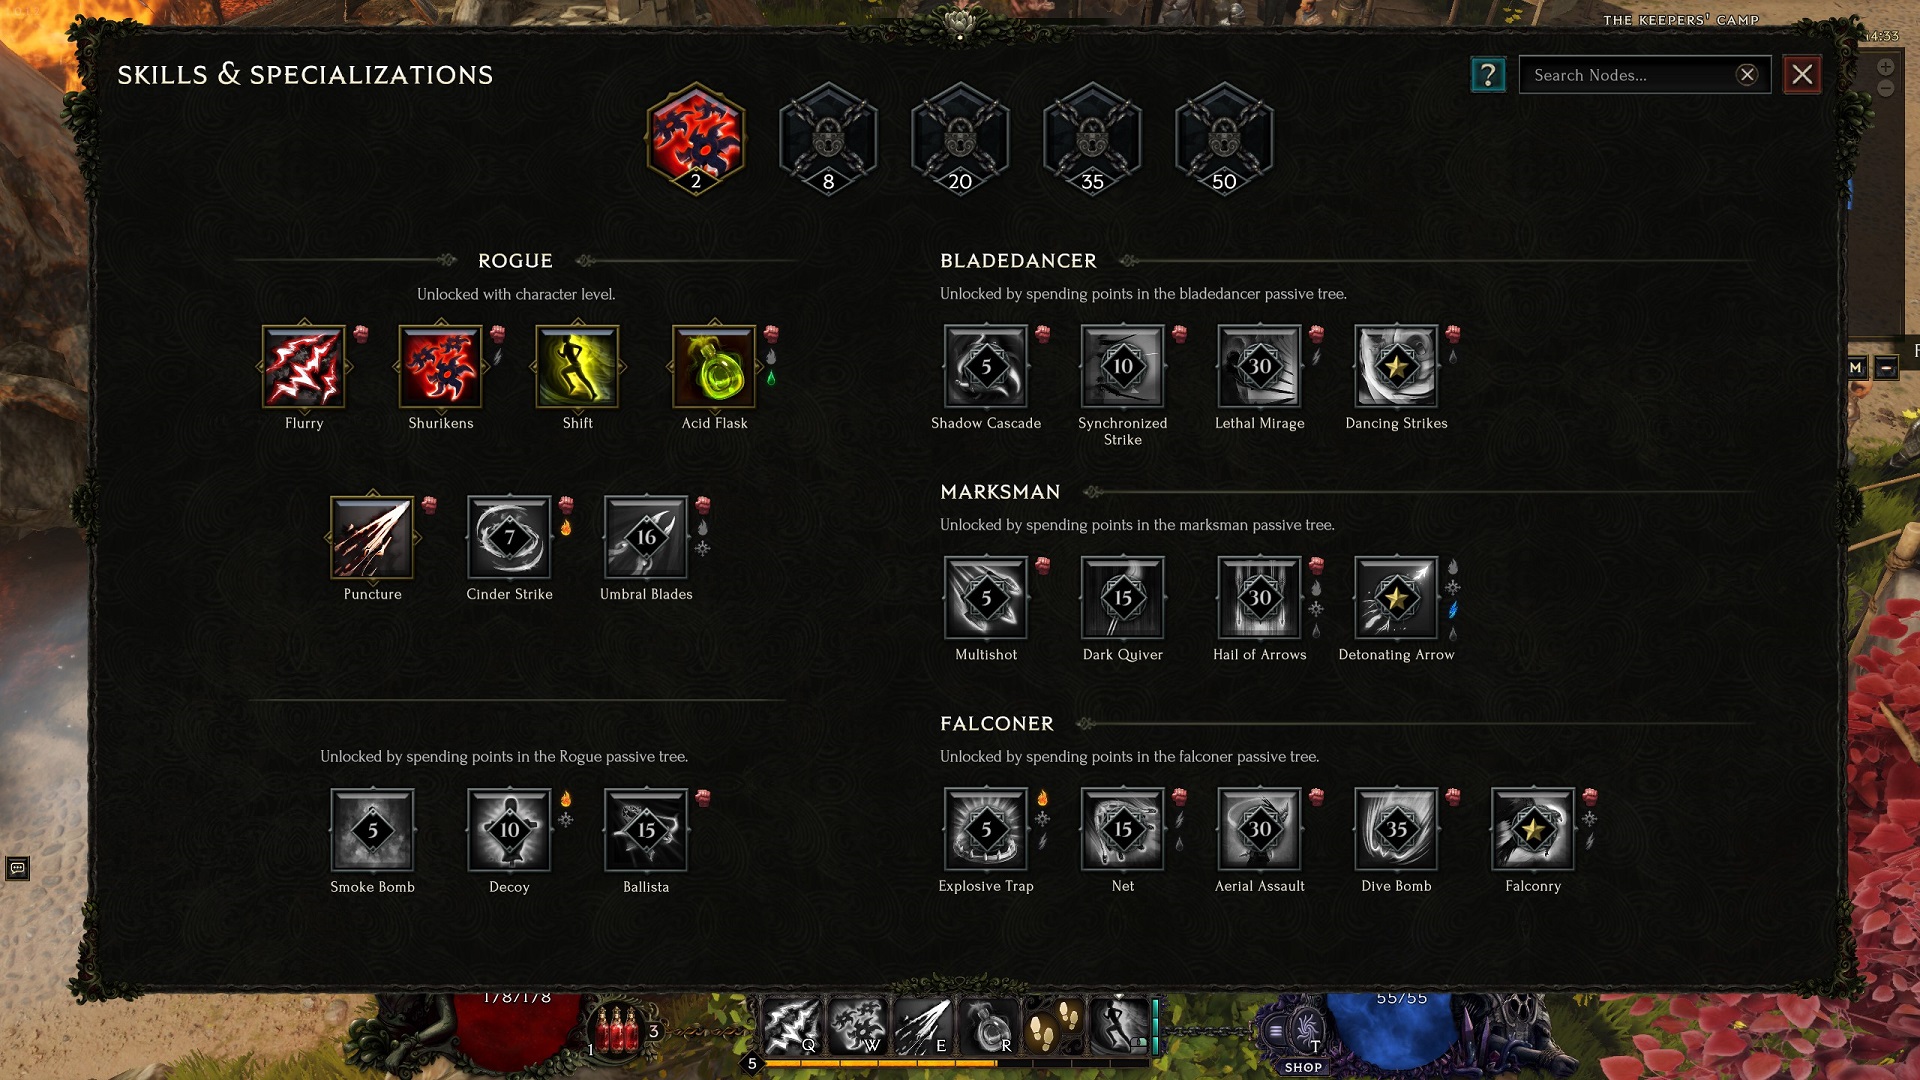 An image of the Rogue's skills in Last Epoch.